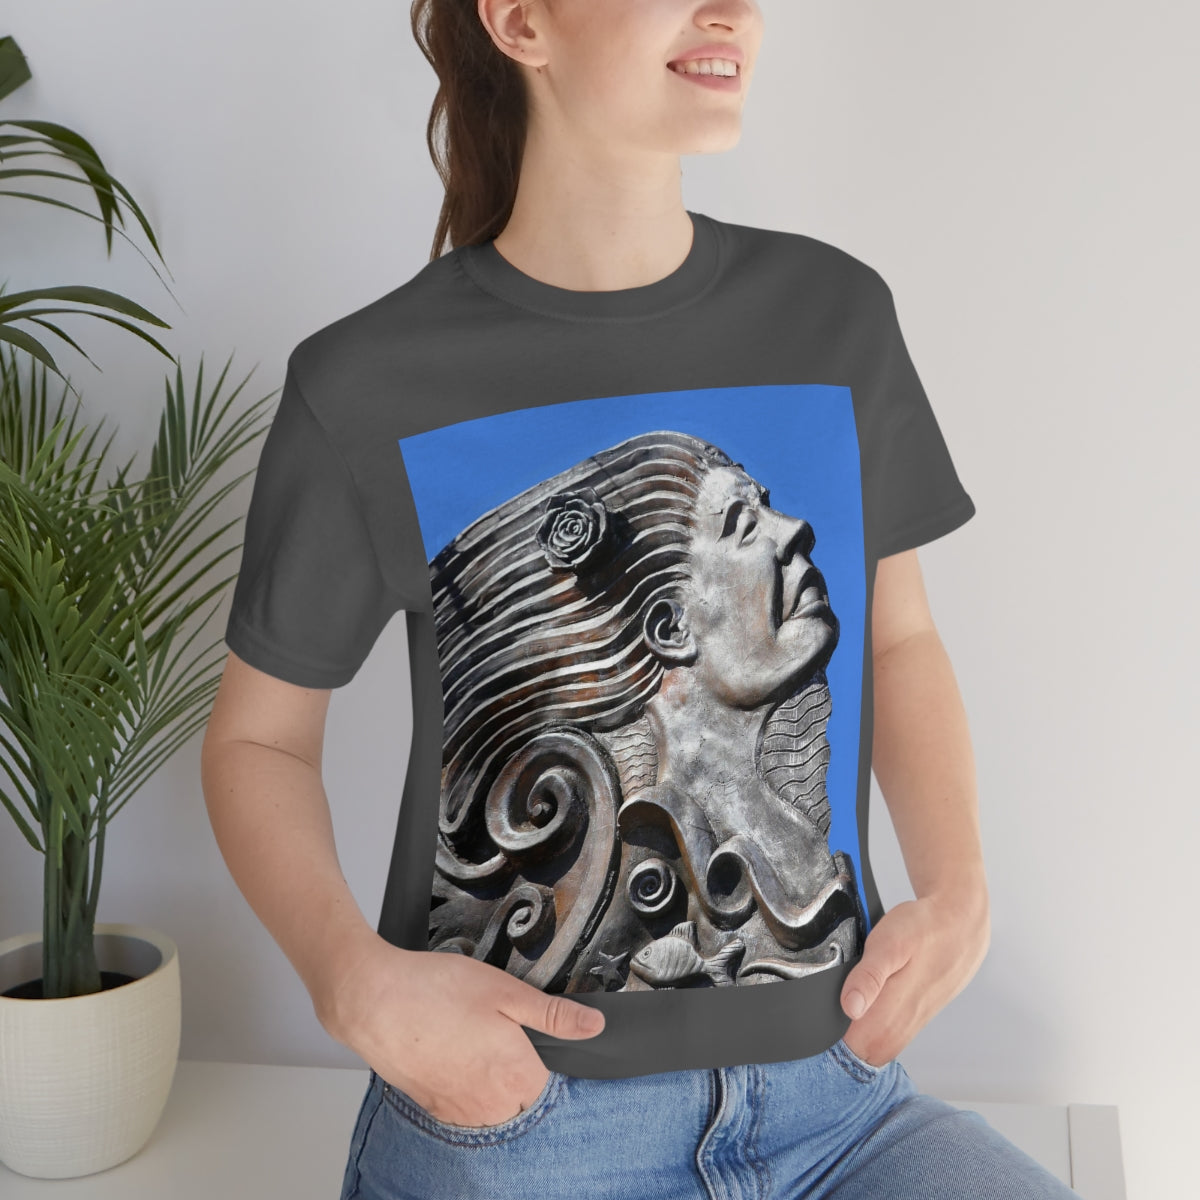 Nymph Beauty - Unisex Jersey Short Sleeve T-Shirt - Fry1Productions